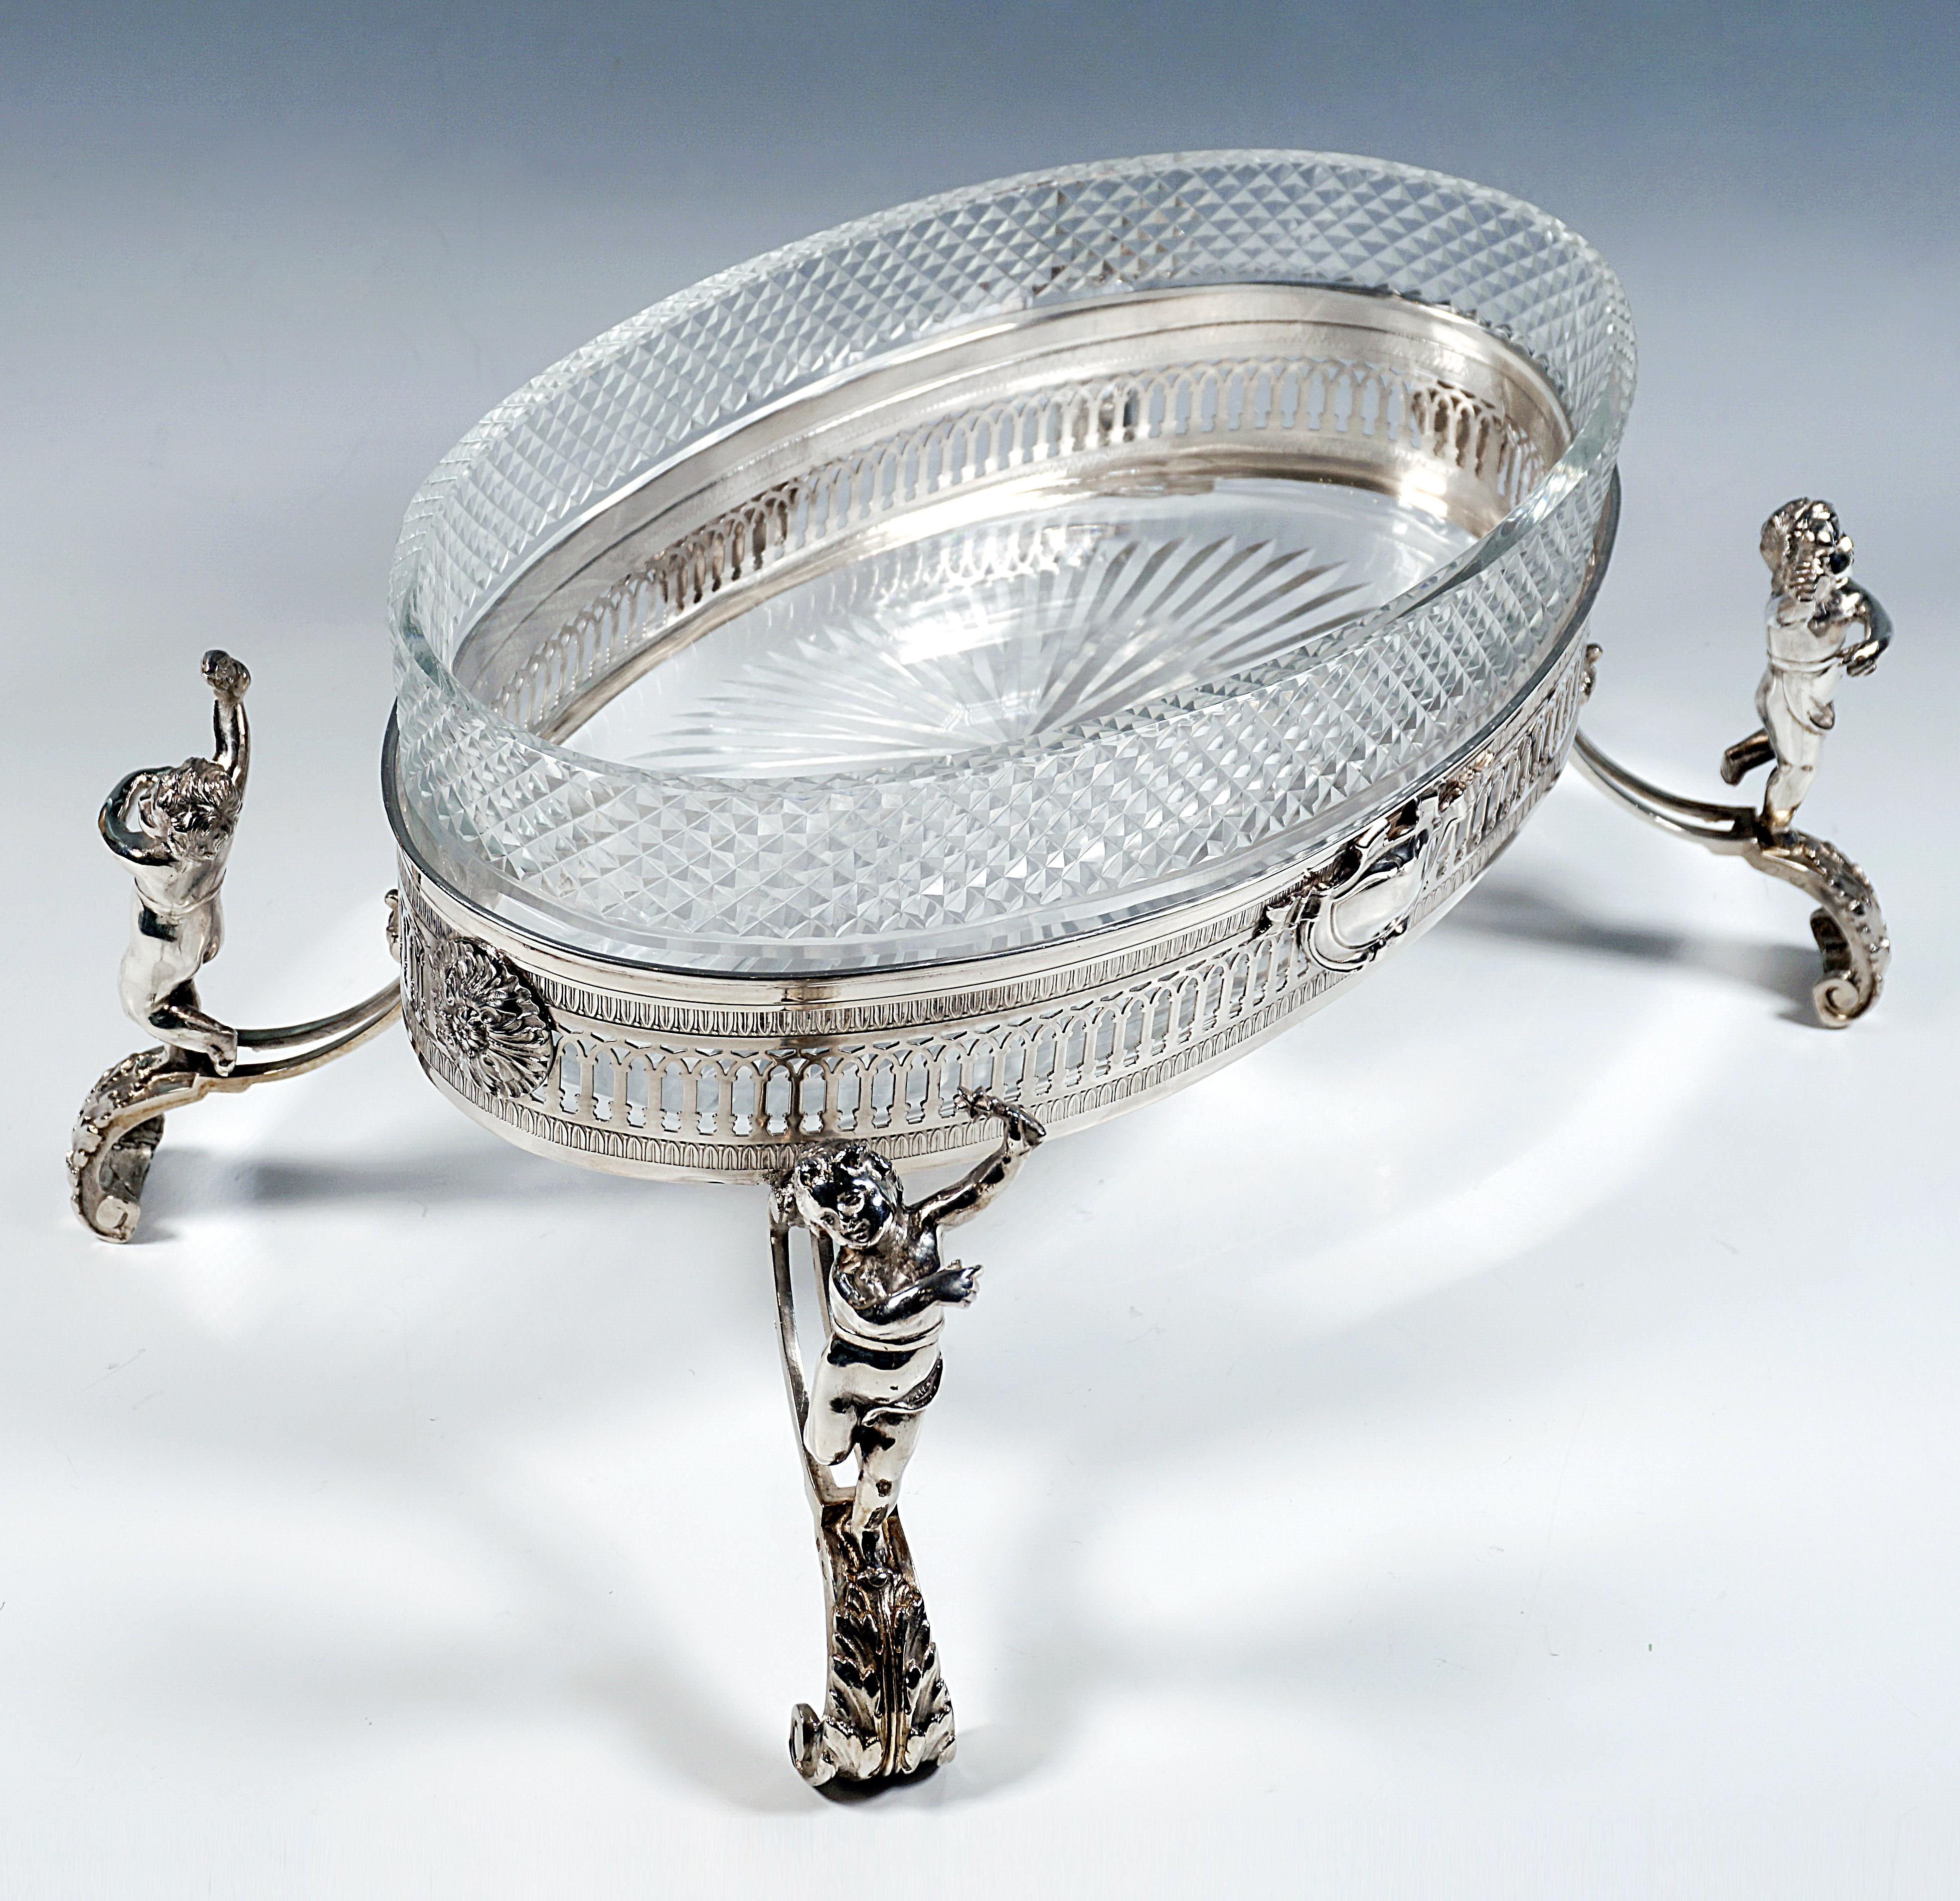 Hand-Crafted Silver Art Nouveau Centerpiece With High Legs & Plastic Putti, France Circa 1910 For Sale